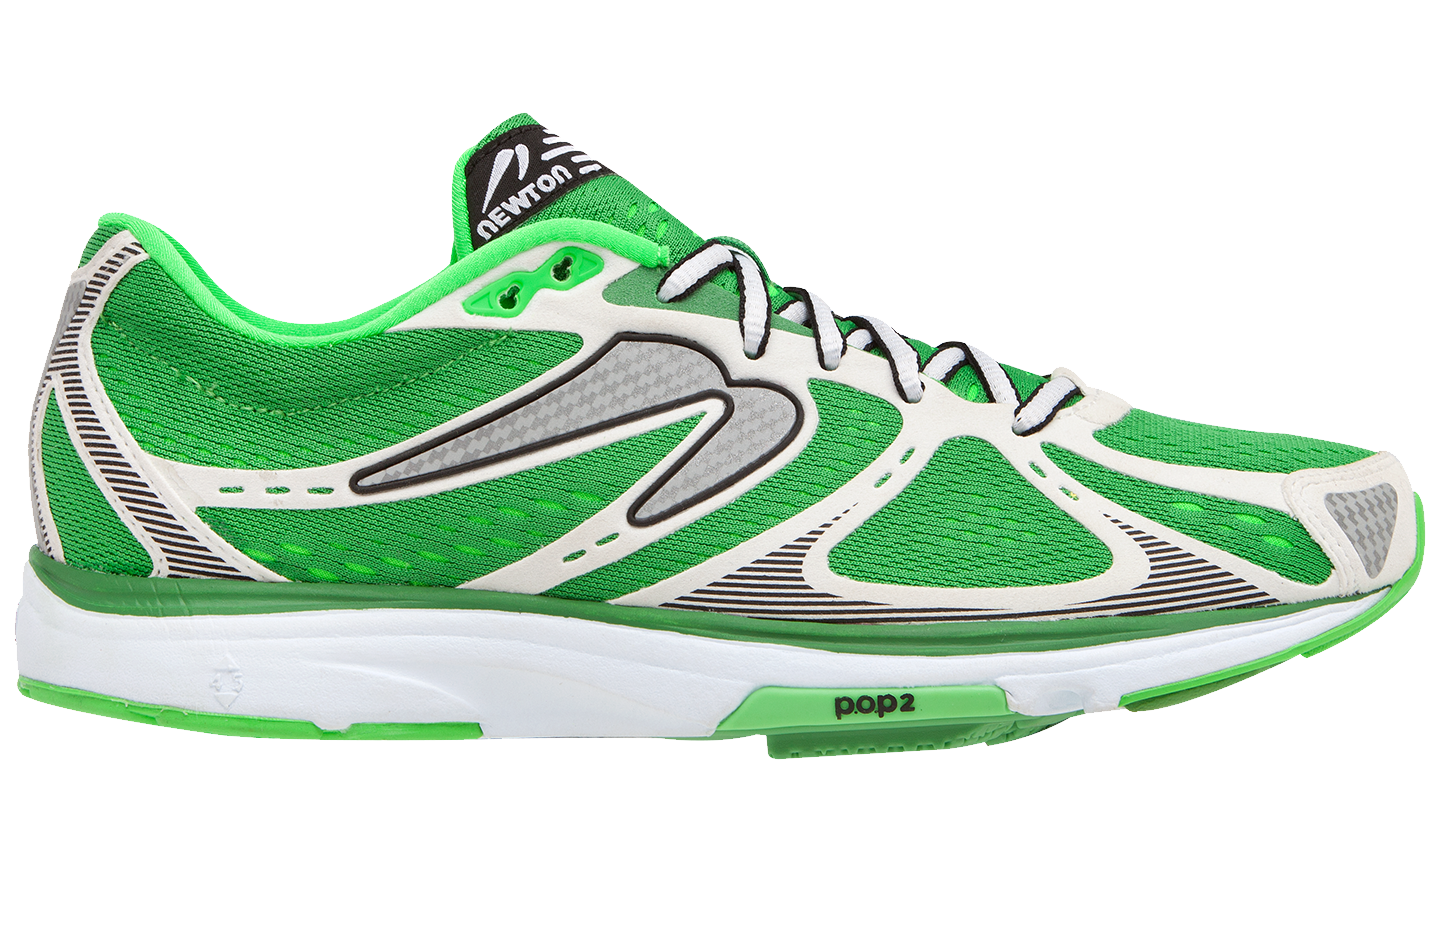 Running shoes PNG images Download 